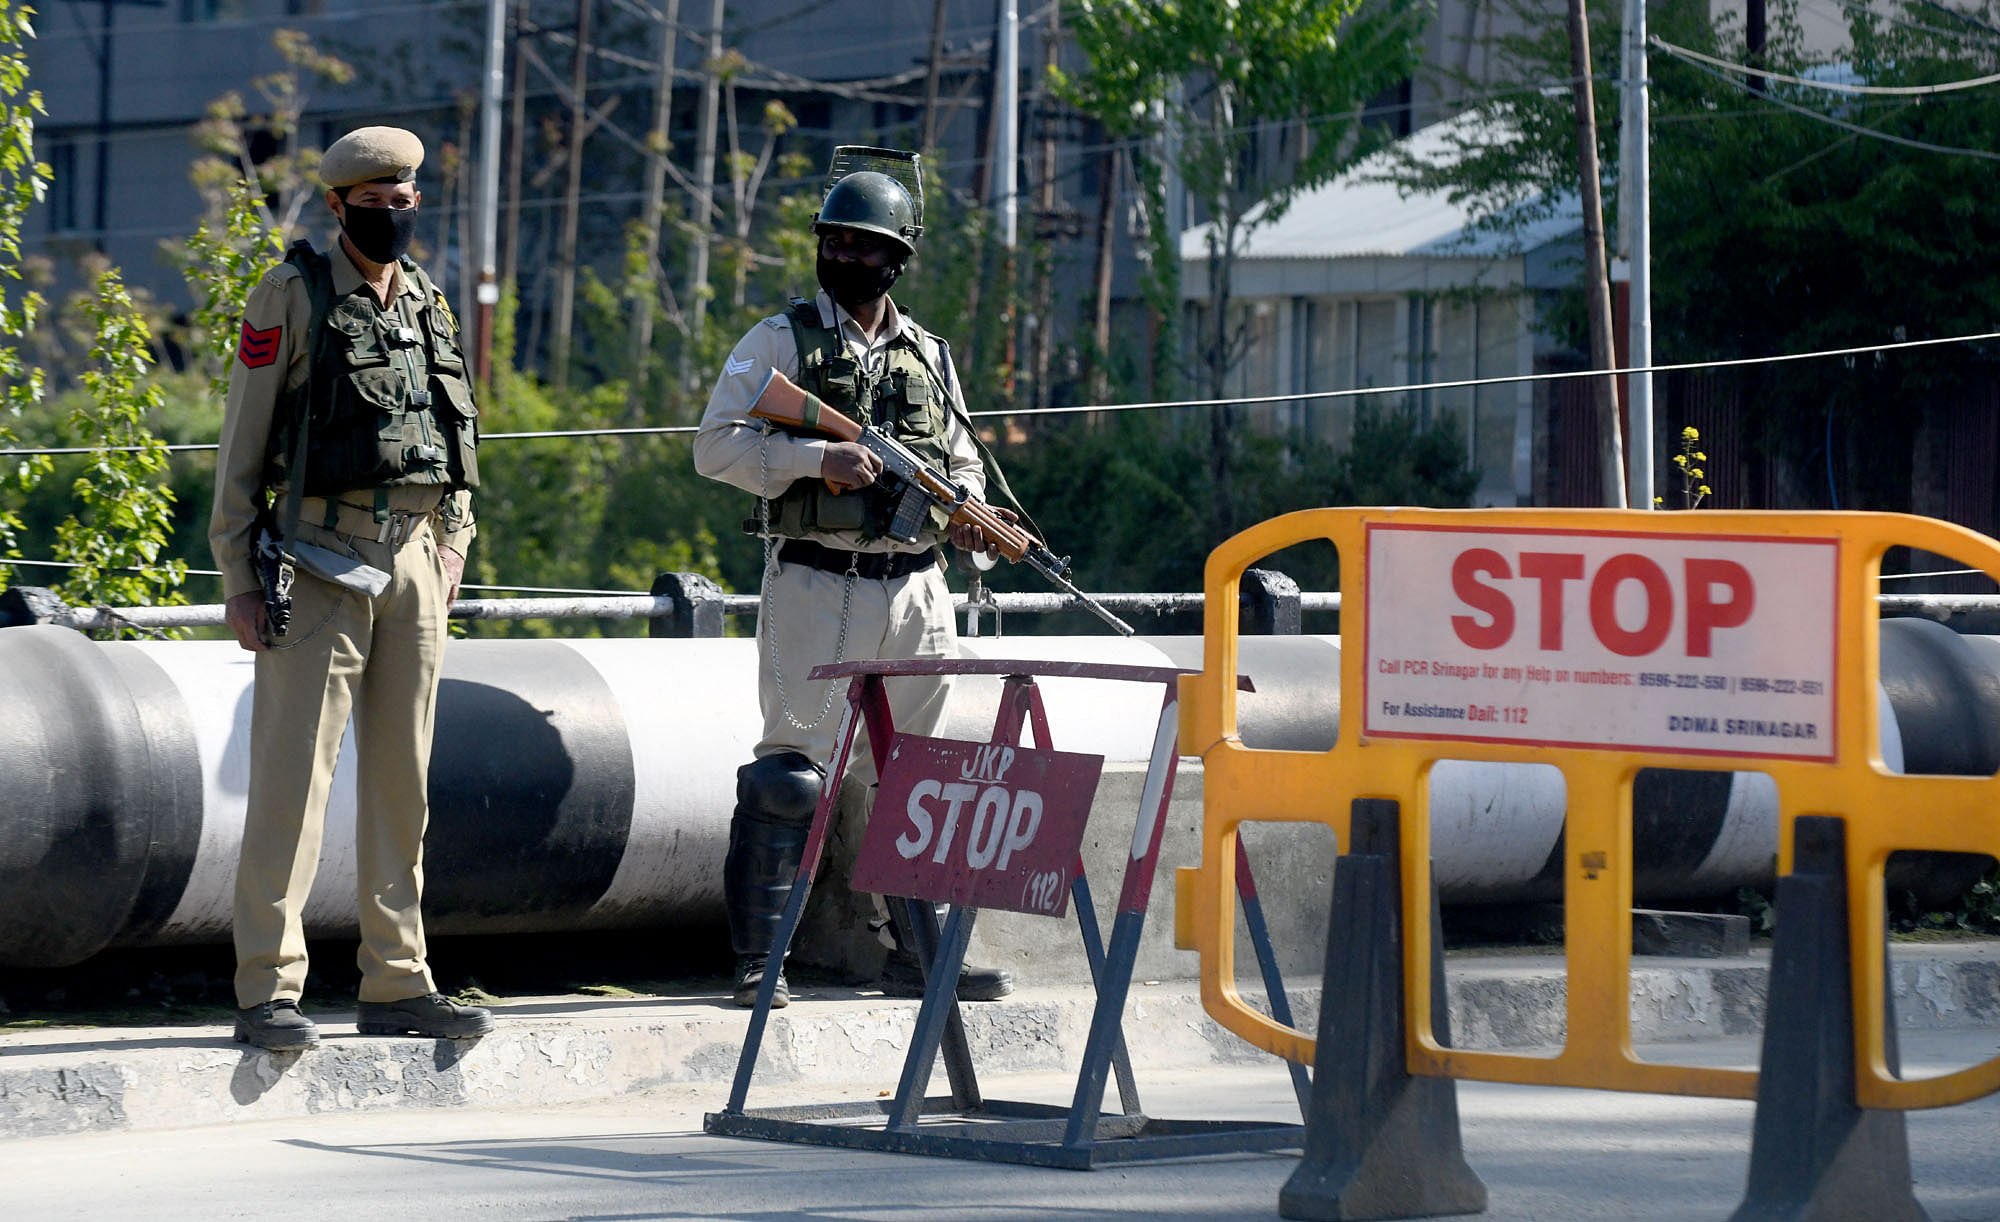 A COVID curfew was imposed on Saturday, 24 April,  across Jammu and Kashmir, by the administration in a bid to curb the spread of COVID-19.